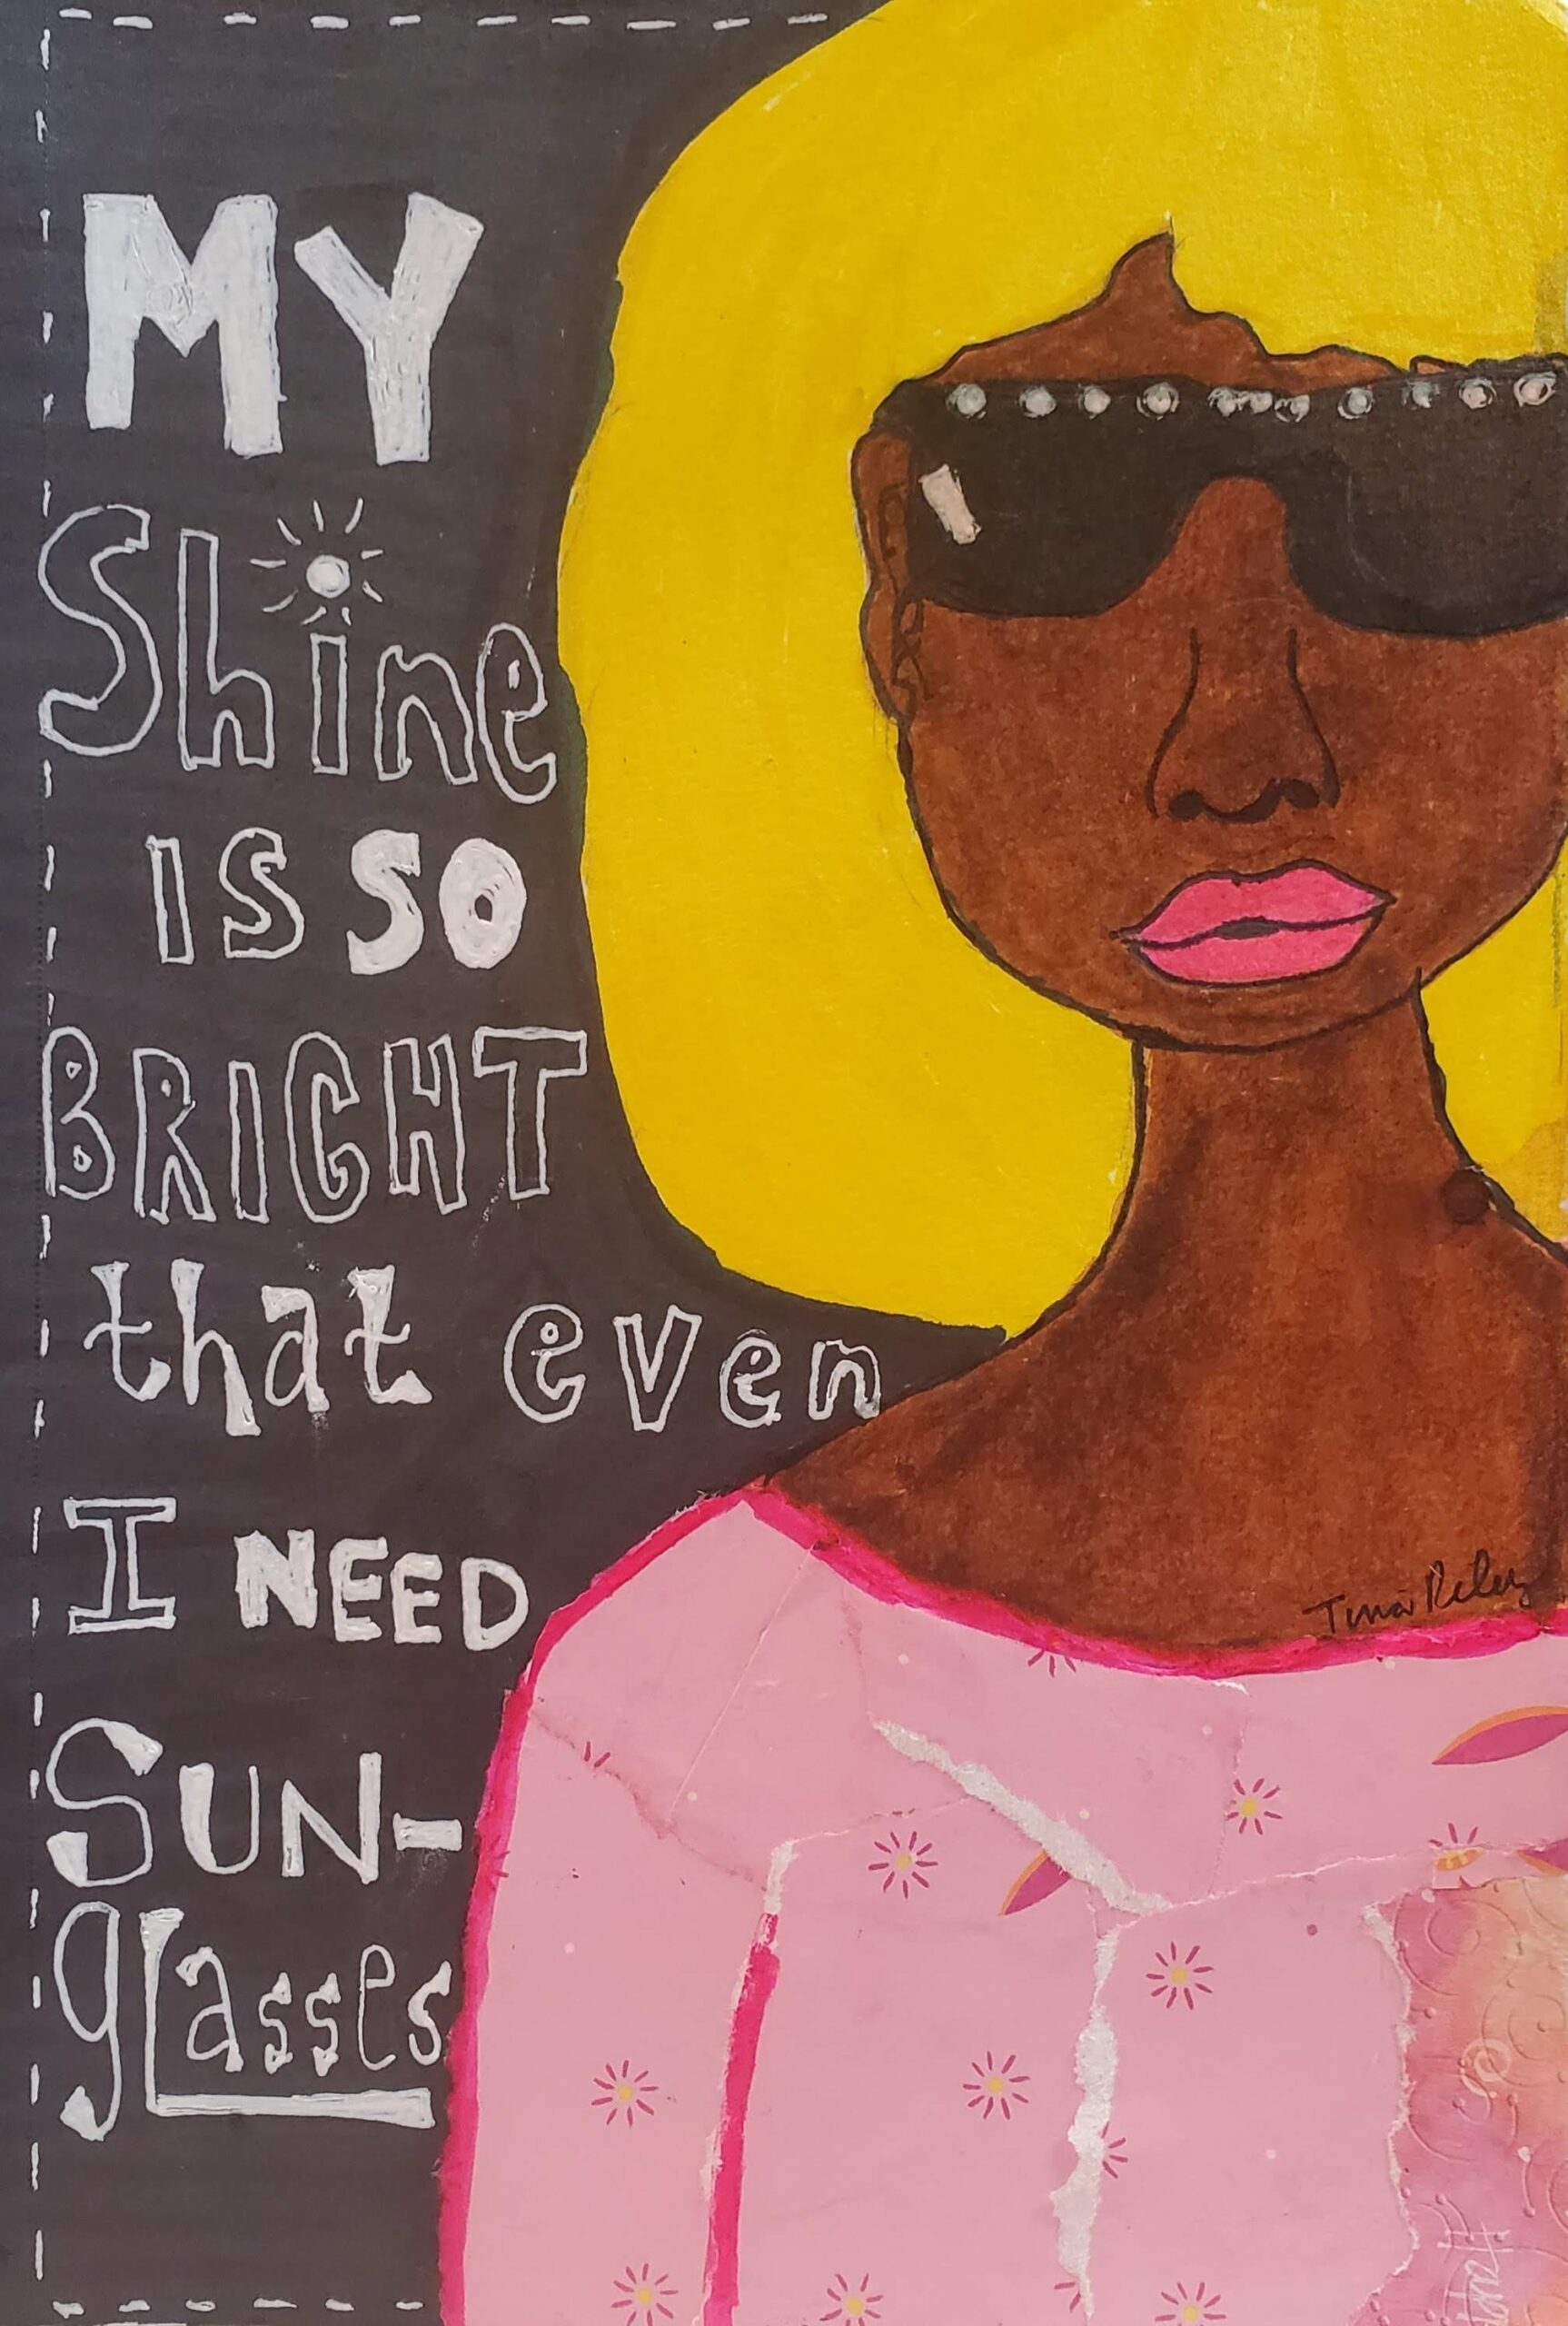 brown girl with blond hair and sunglasses. "My shine is so bright that even I need sunglasses"